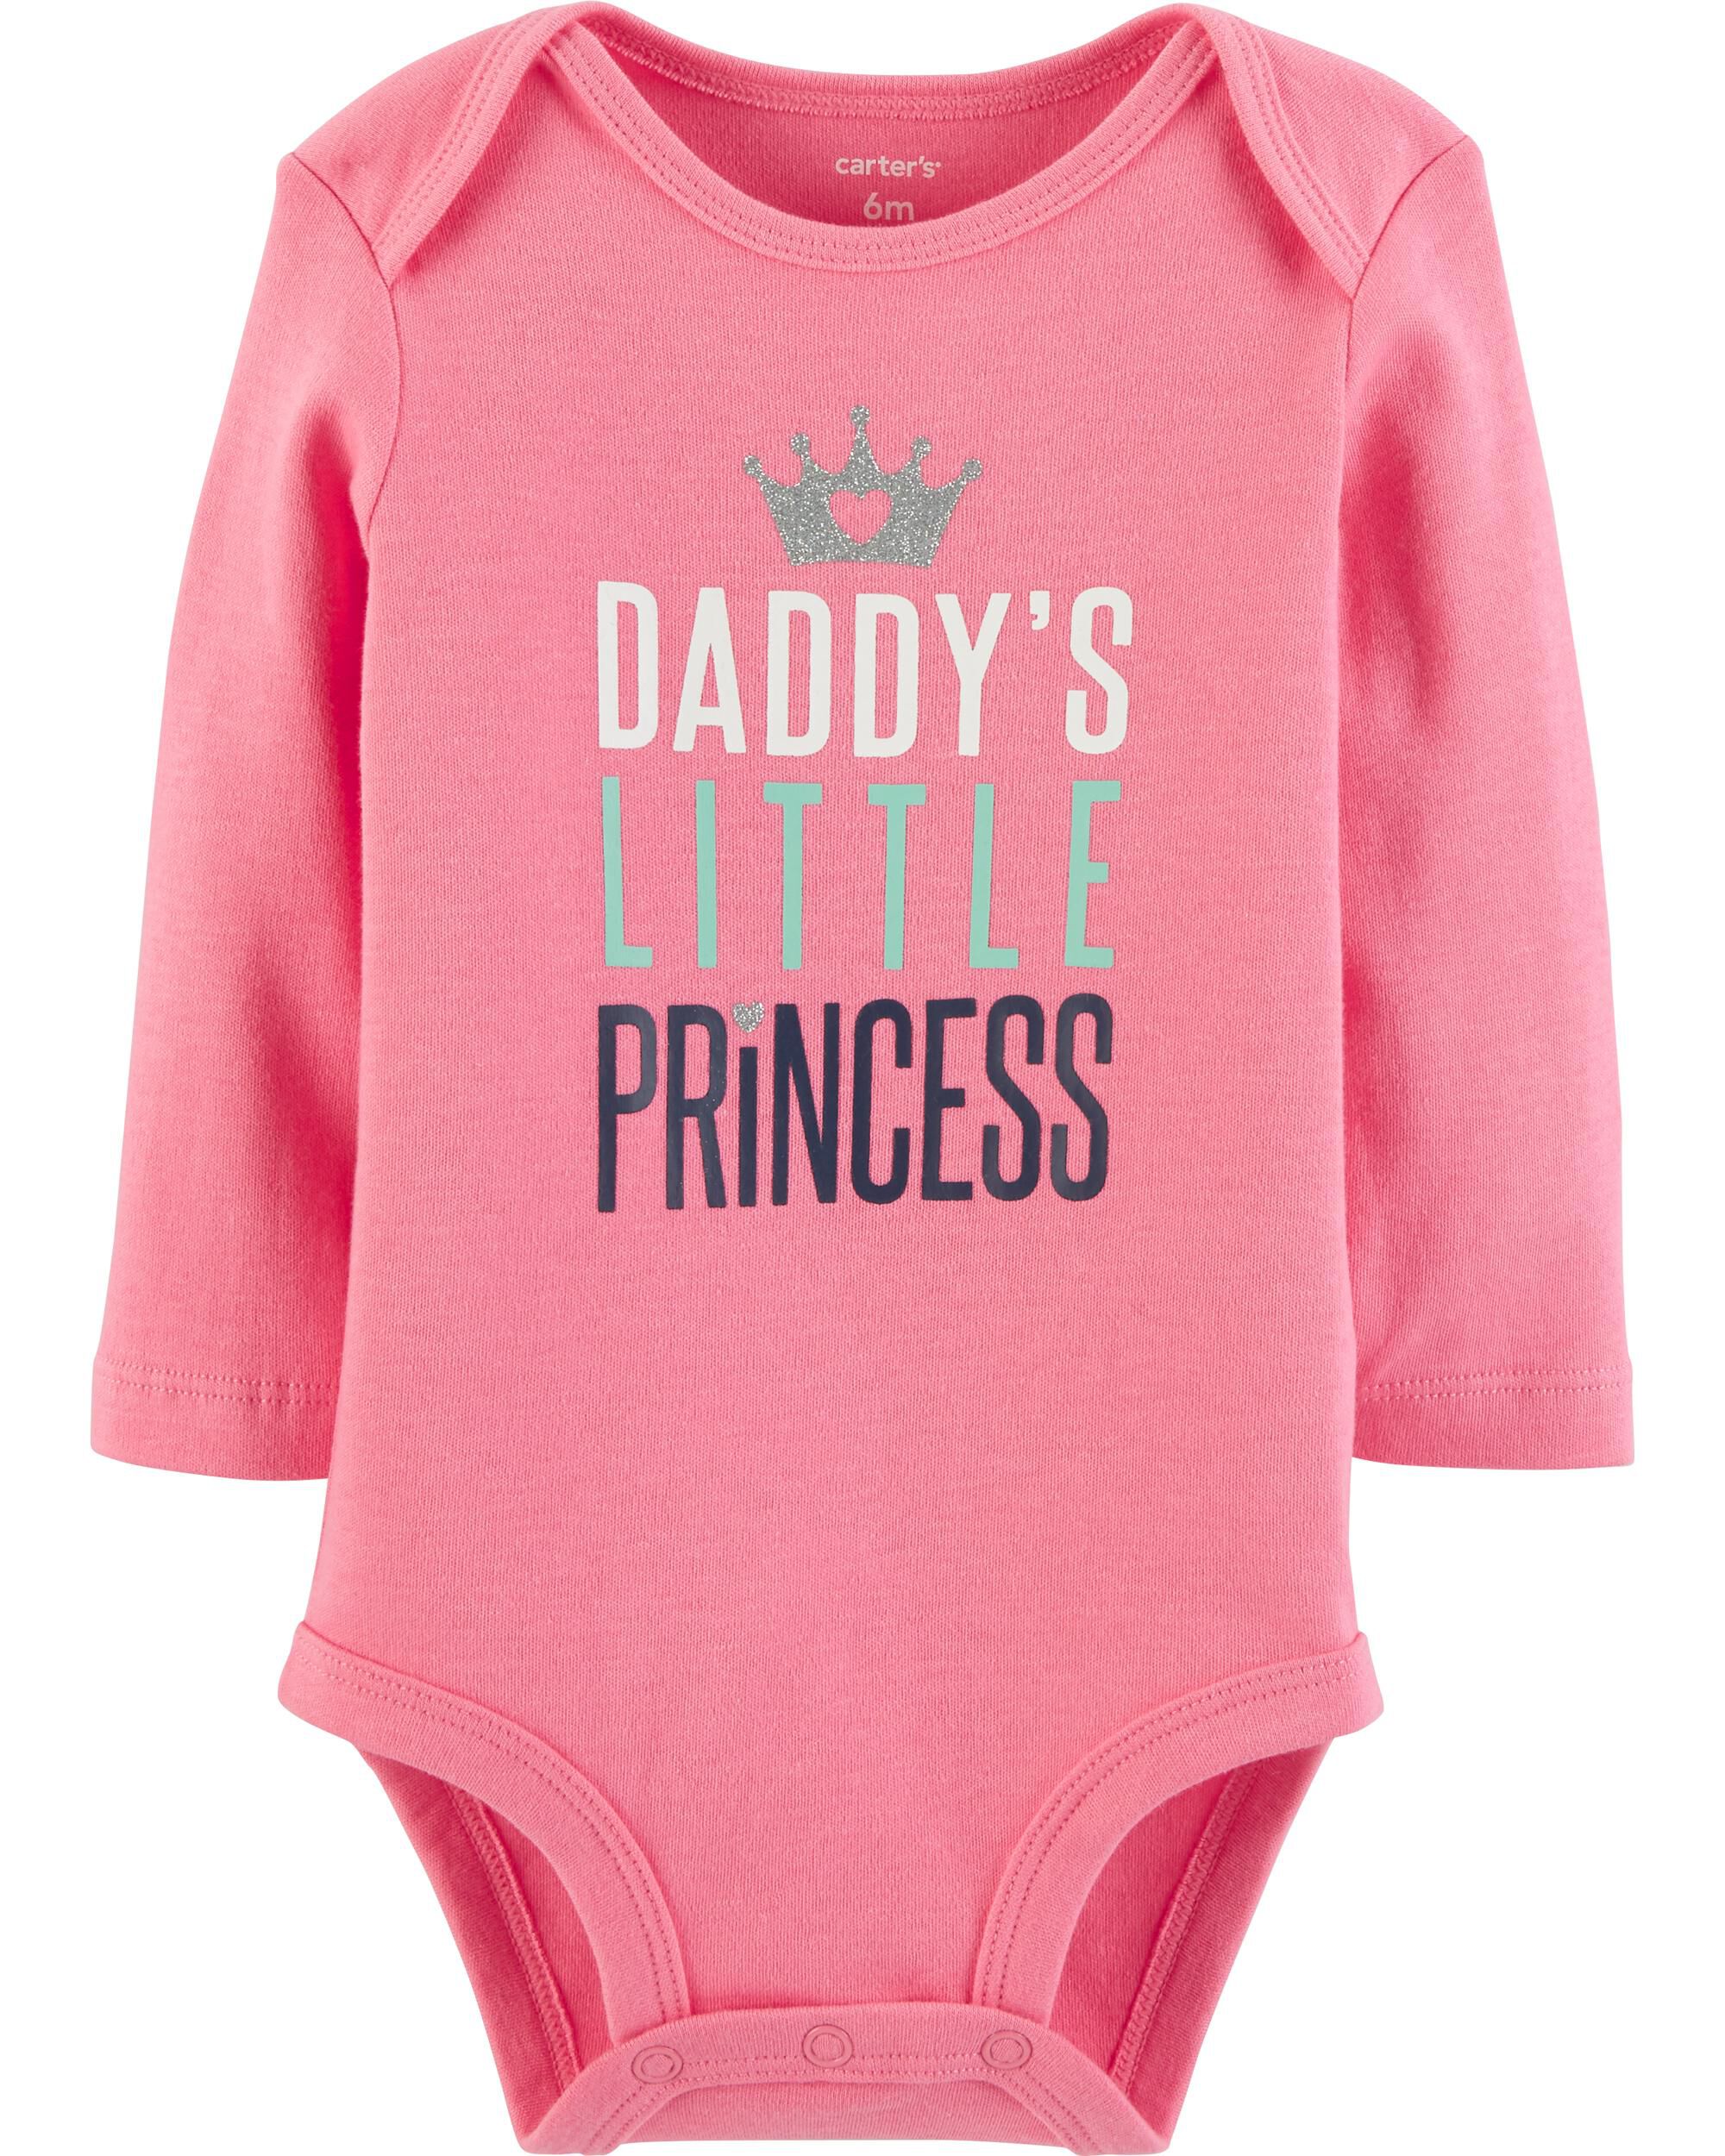 daddys little princess carters